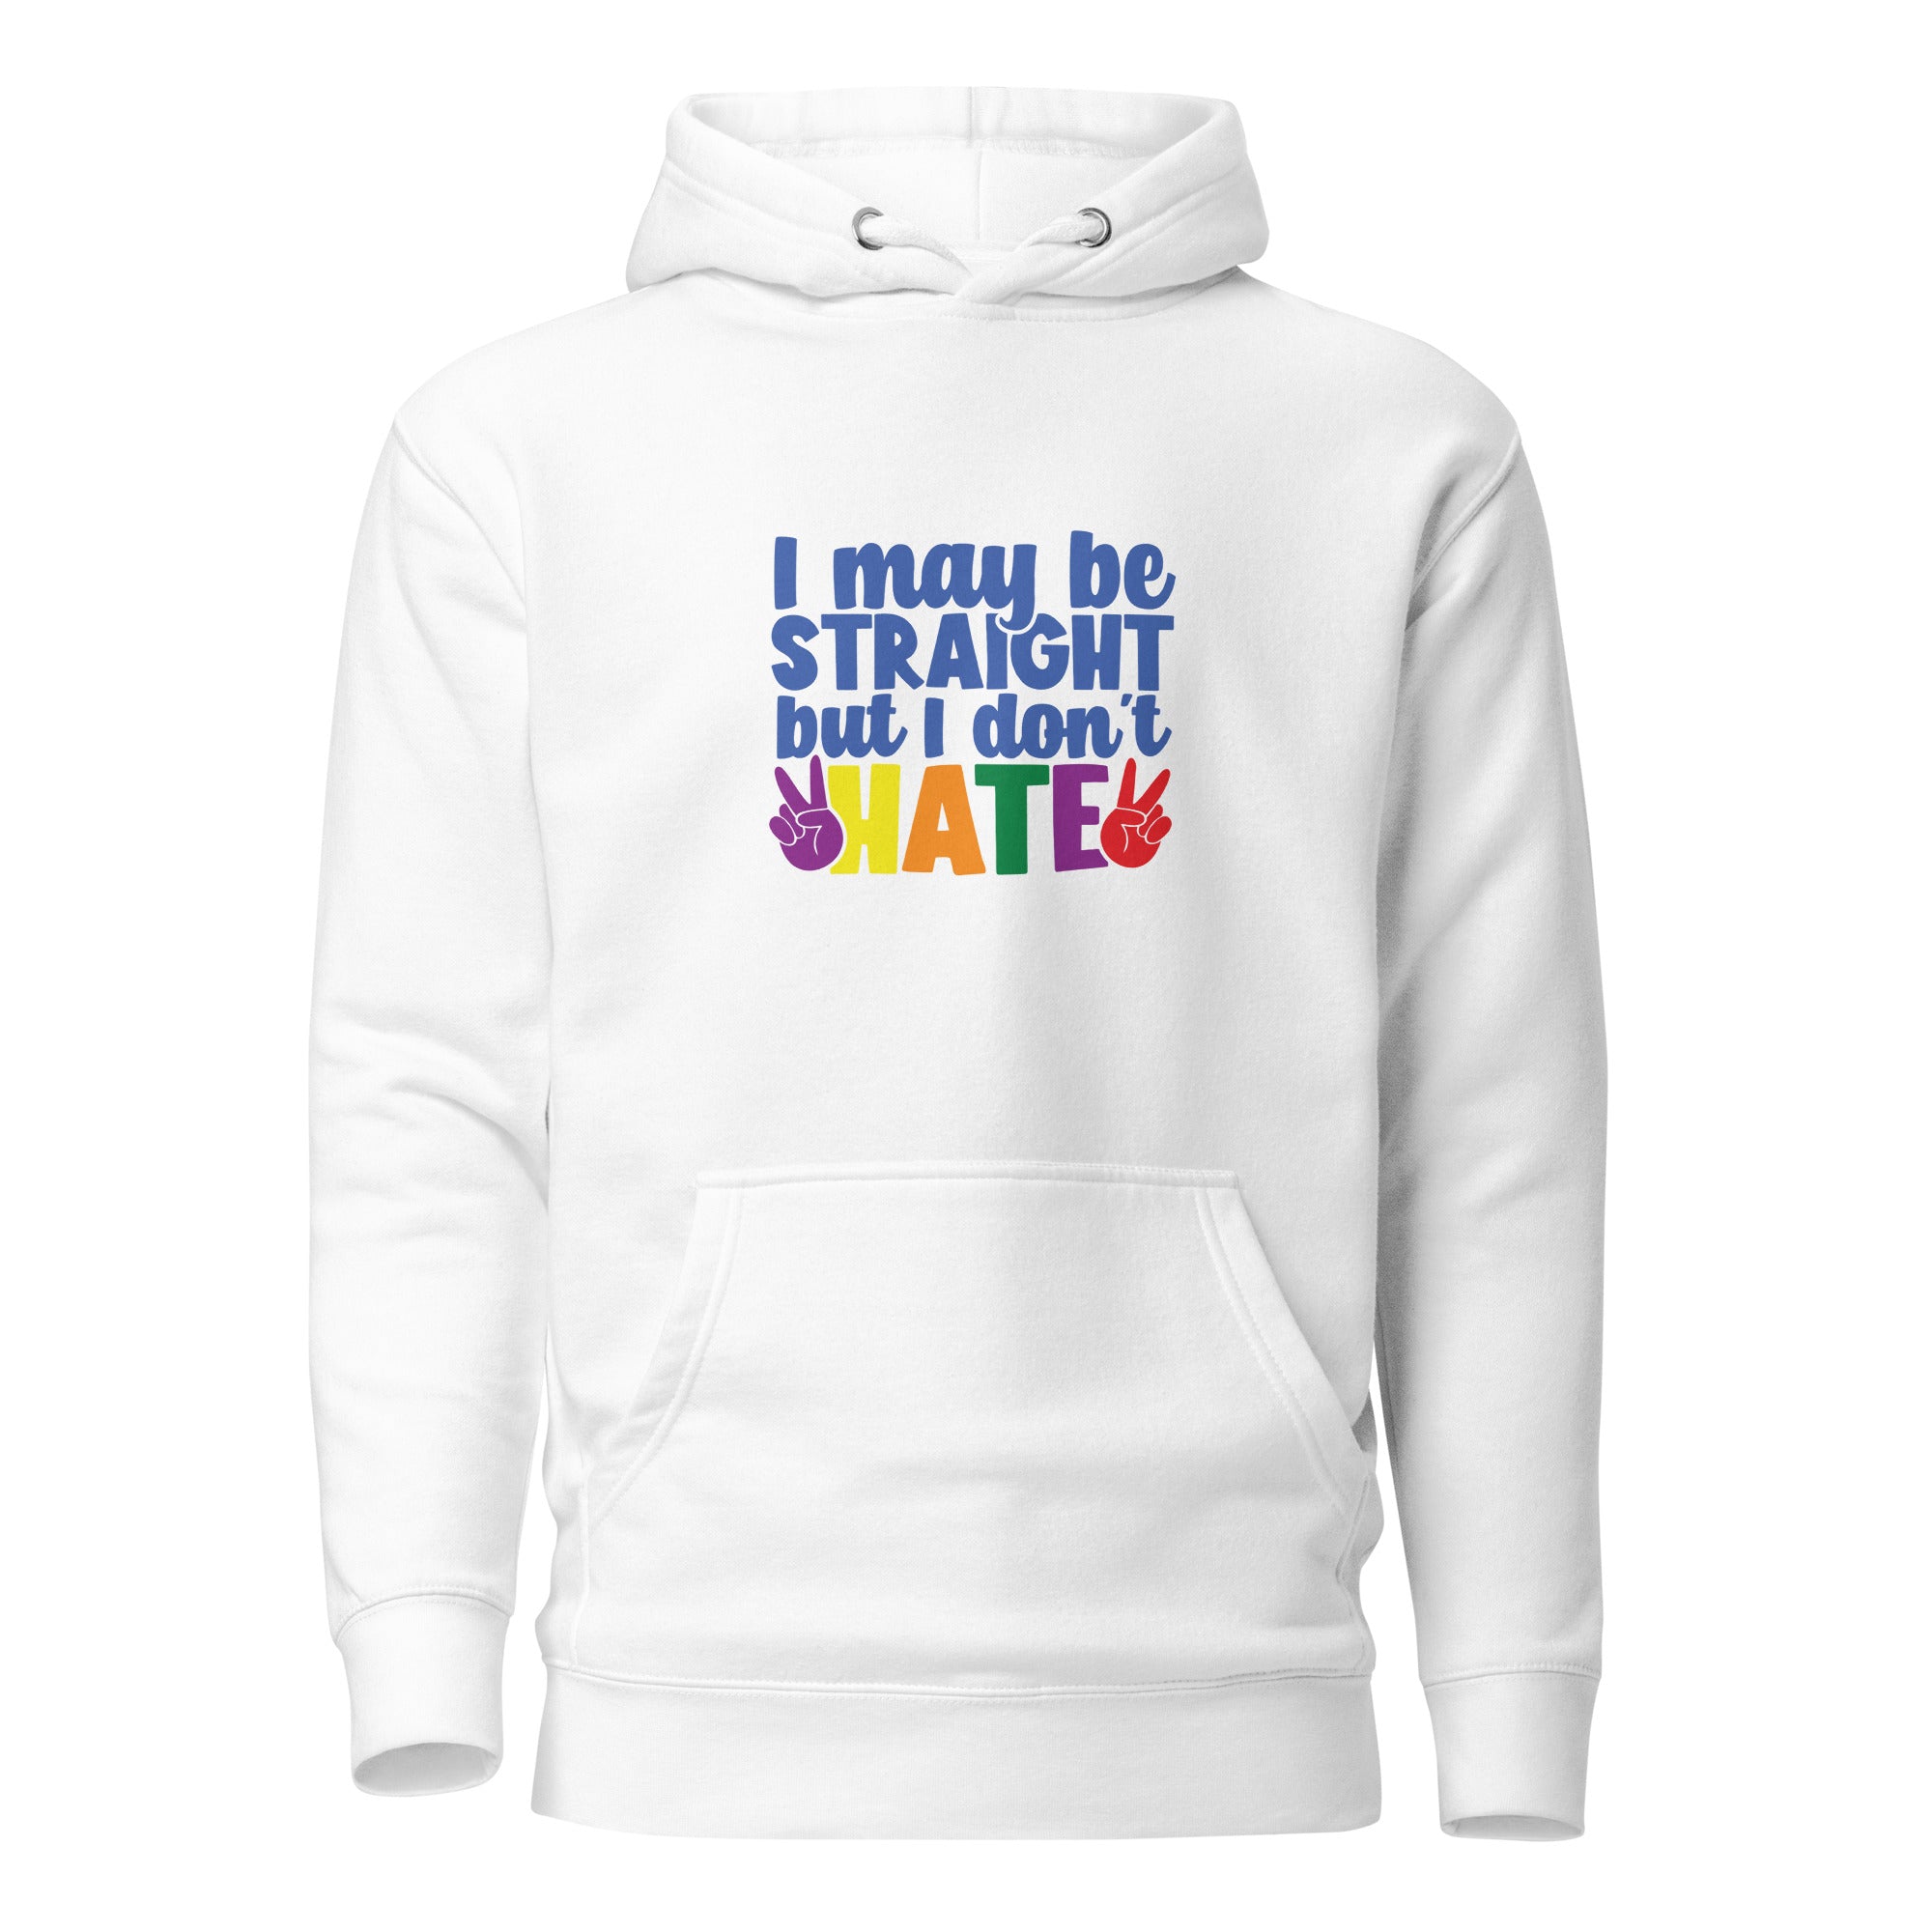 Unisex Hoodie- I may be straight but I don't hate